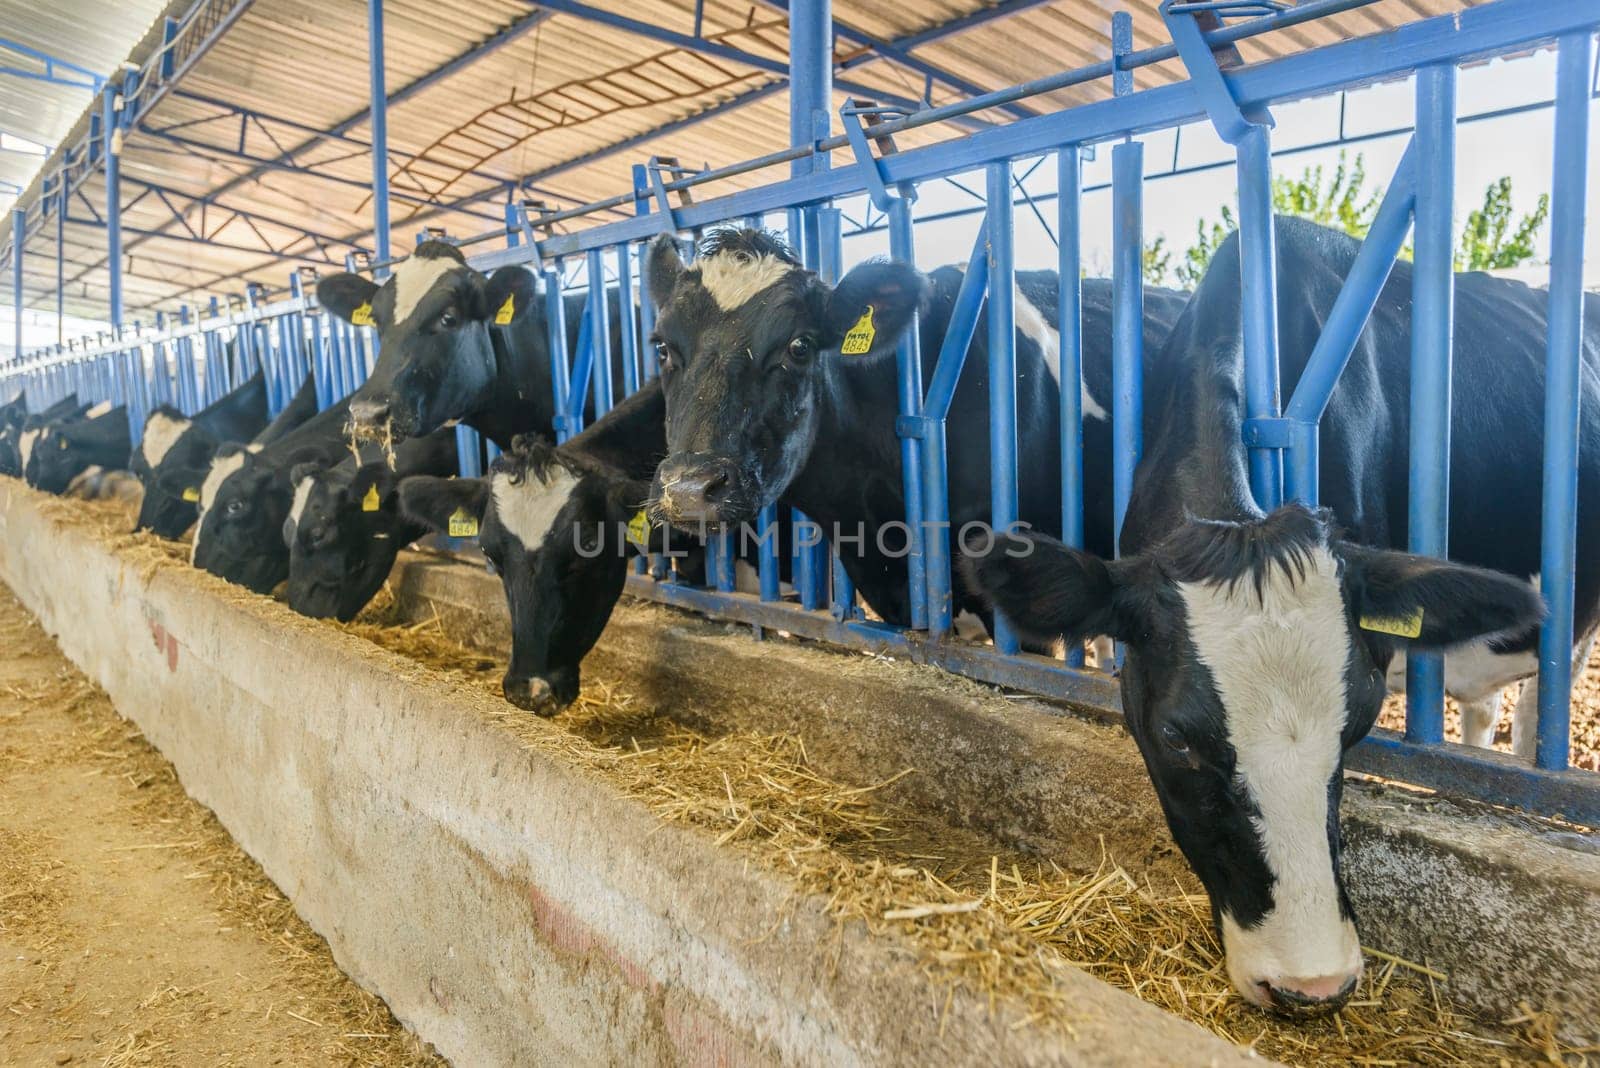 agriculture industry, farming and animal husbandry concept - herd of cows eating hay in cowshed on dairy farm by emirkoo